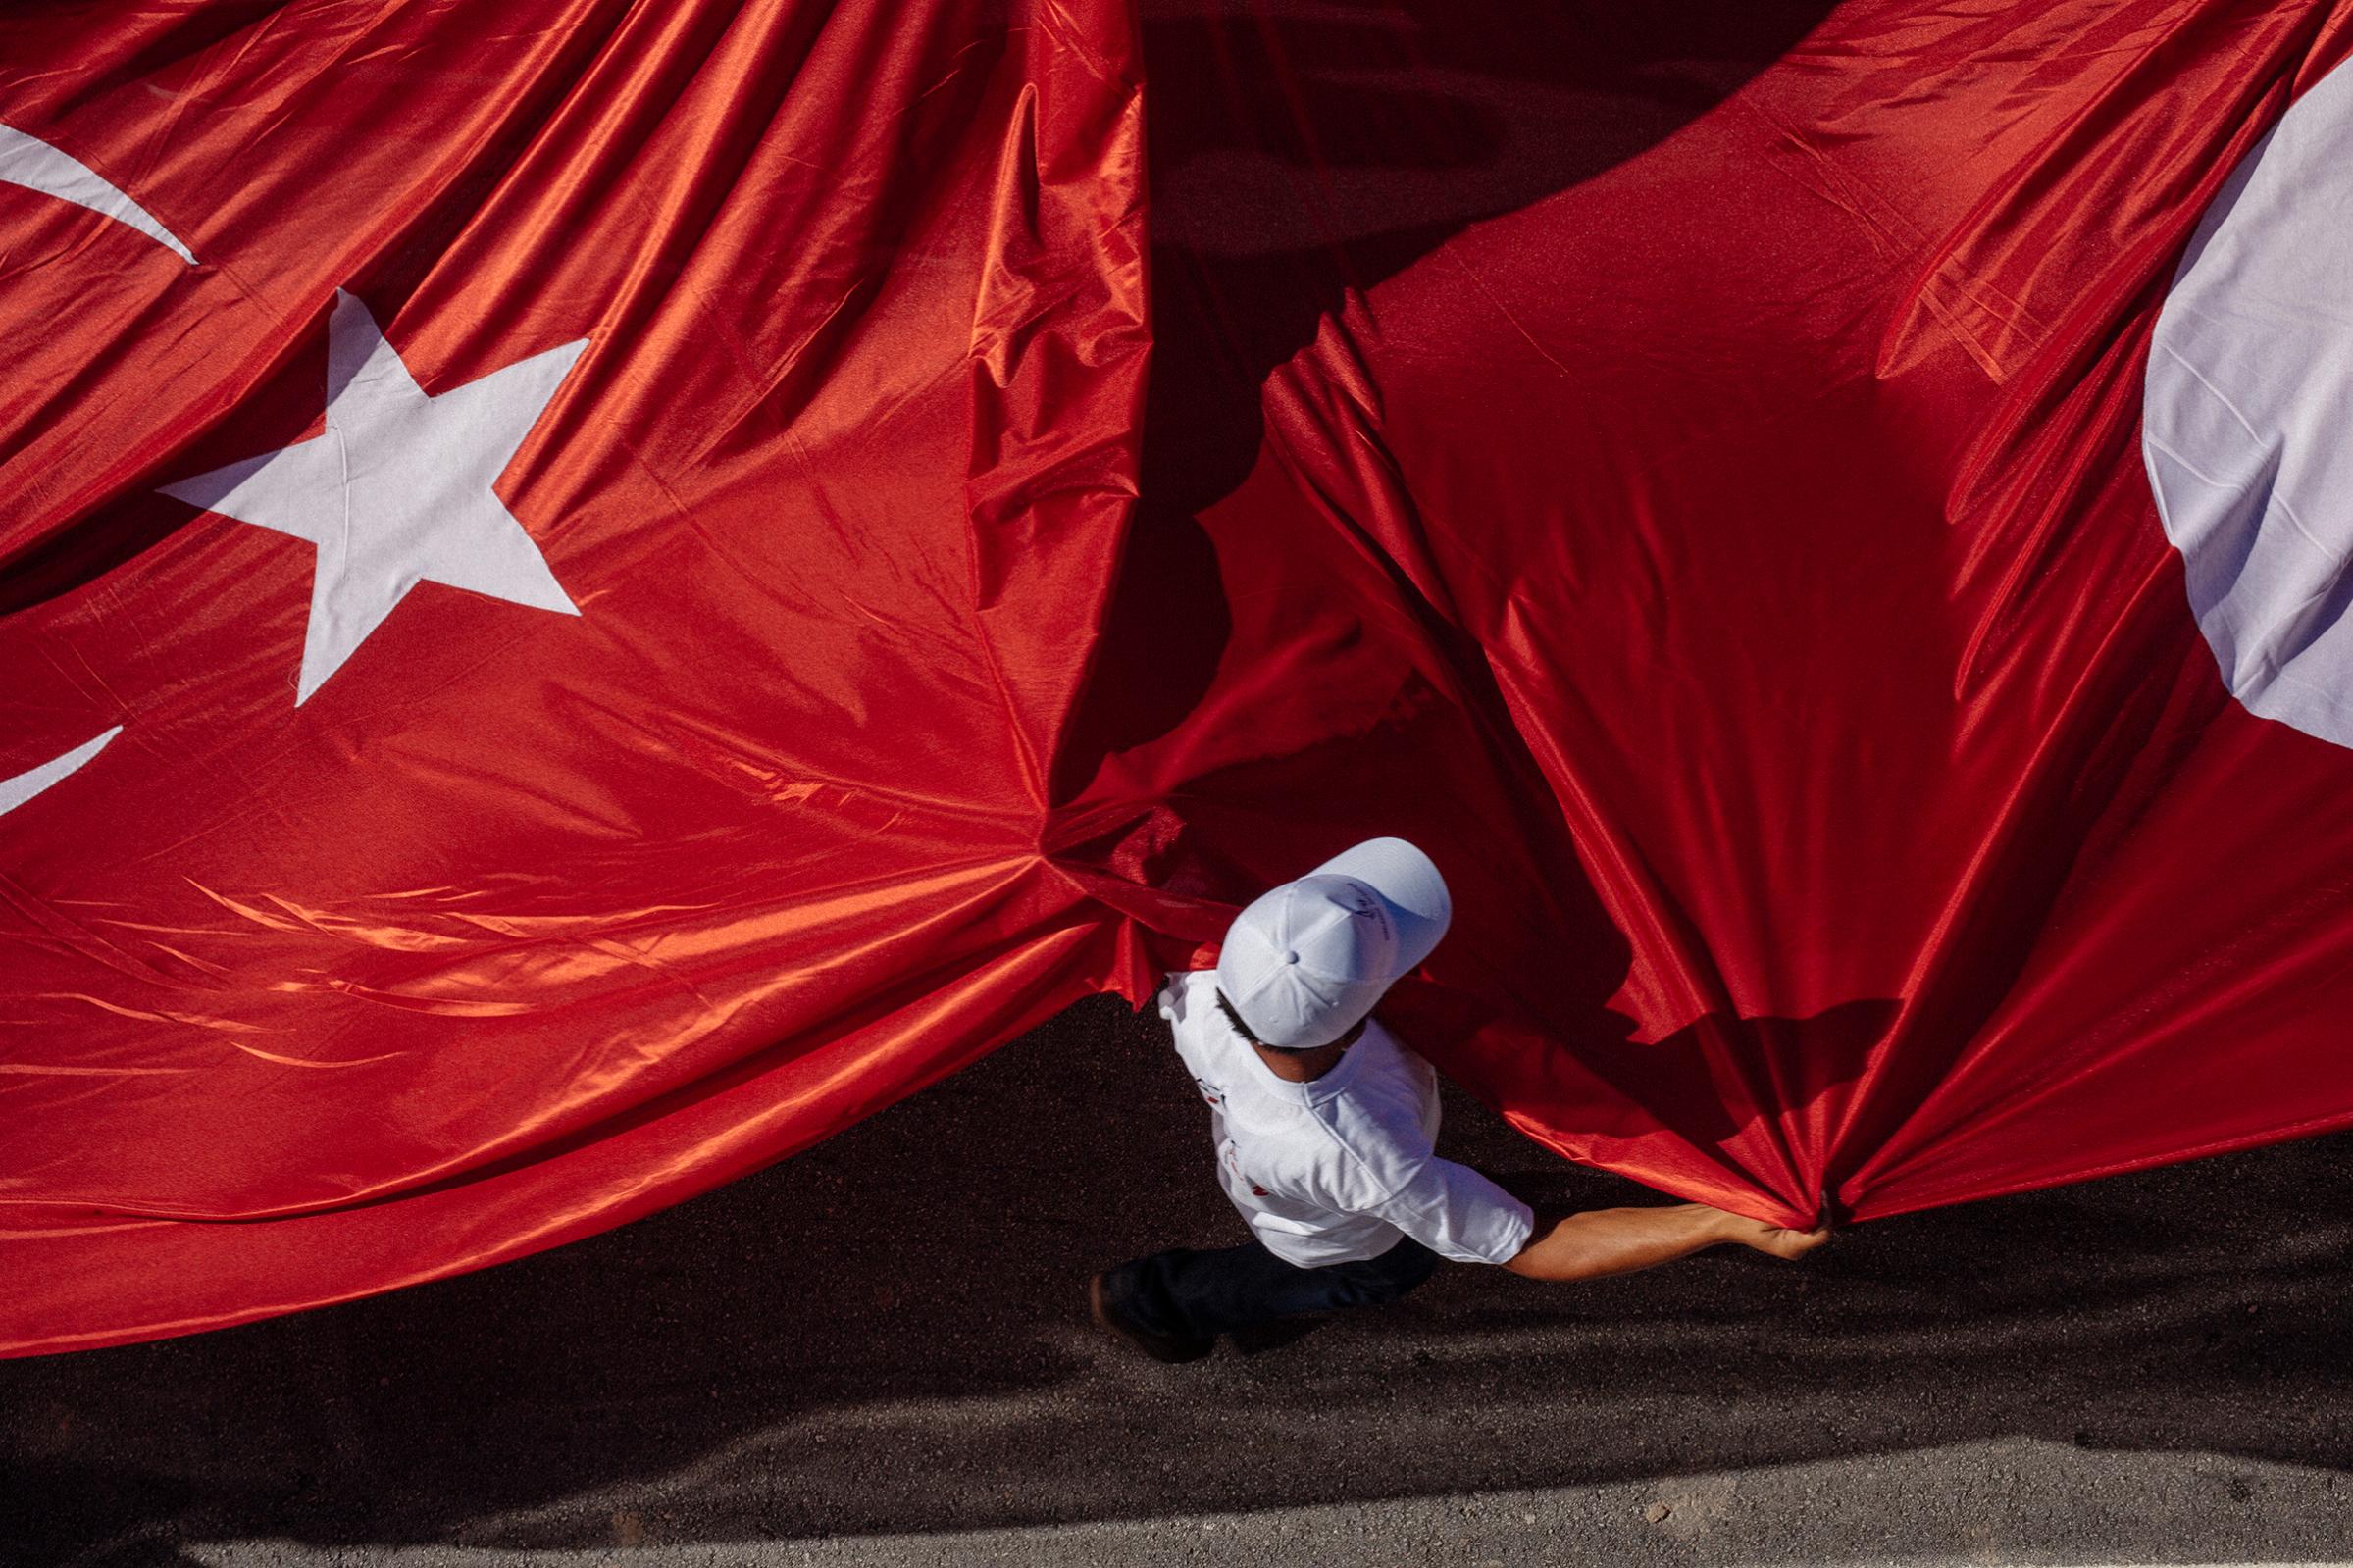 TURKEY, Sakarya/Hendek, People carrie a 1 km long Turkish flag during Justice March, which he started to walk for Justice from Ankara to Istanbul on 16th June. 2017